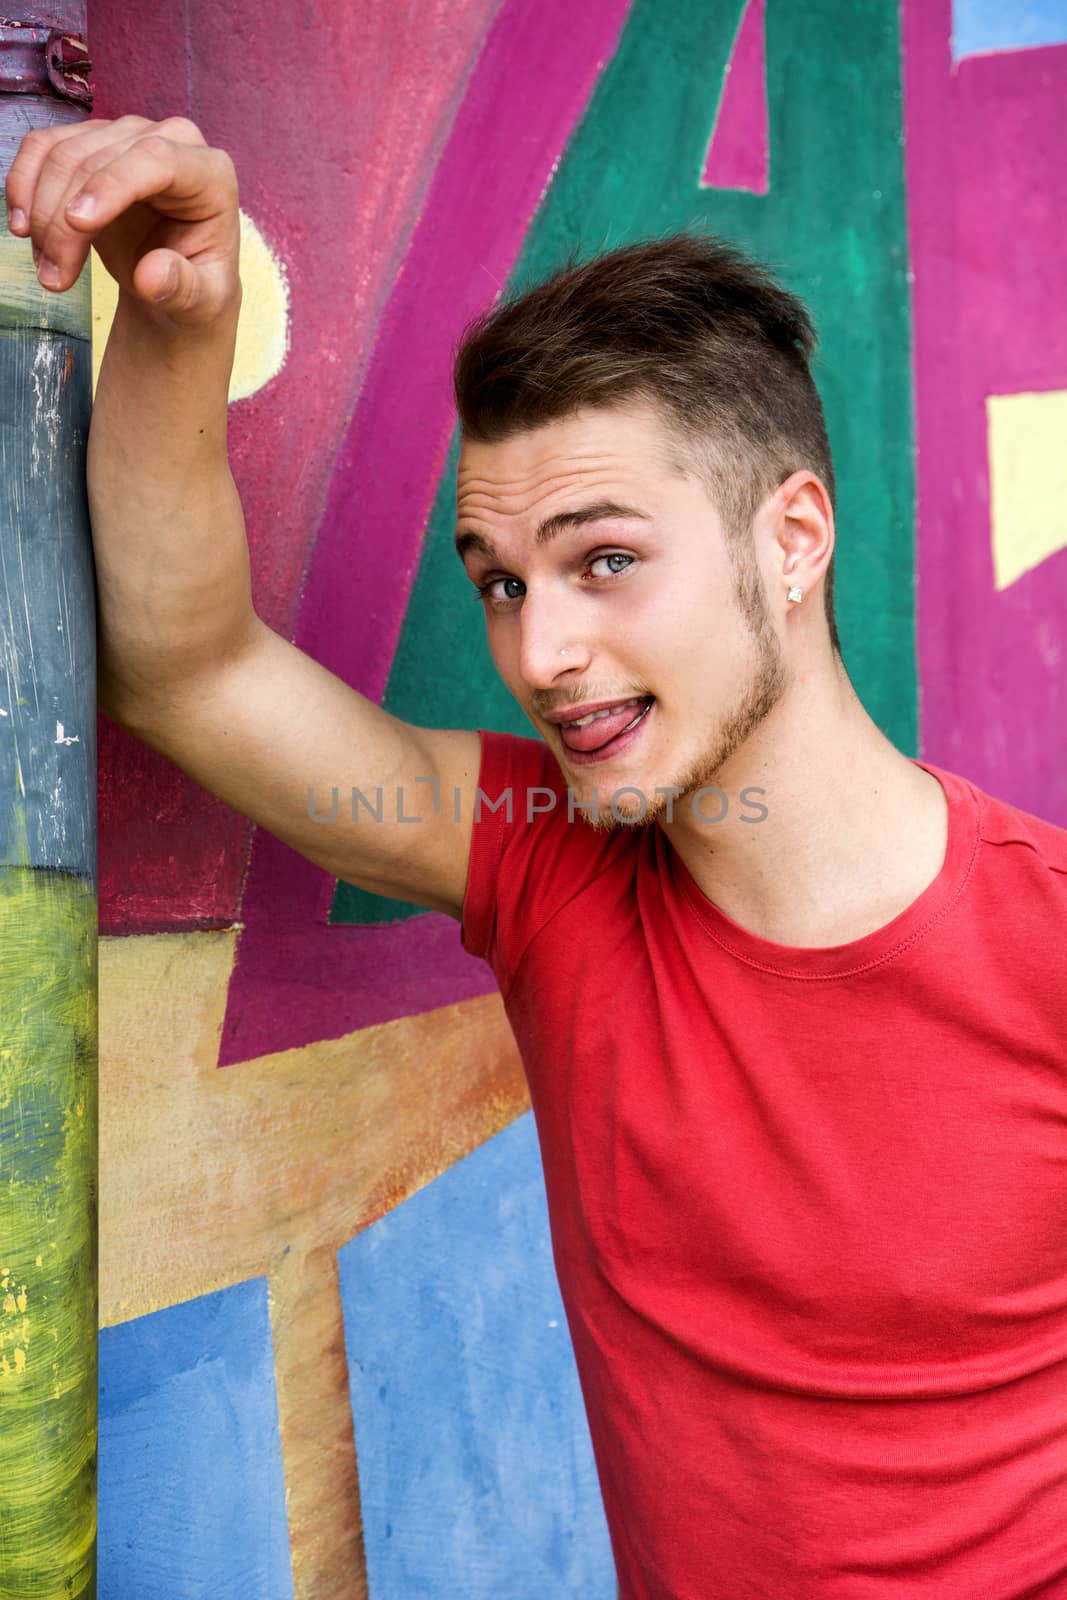 Handsome blond young man against colorful graffiti wall by artofphoto